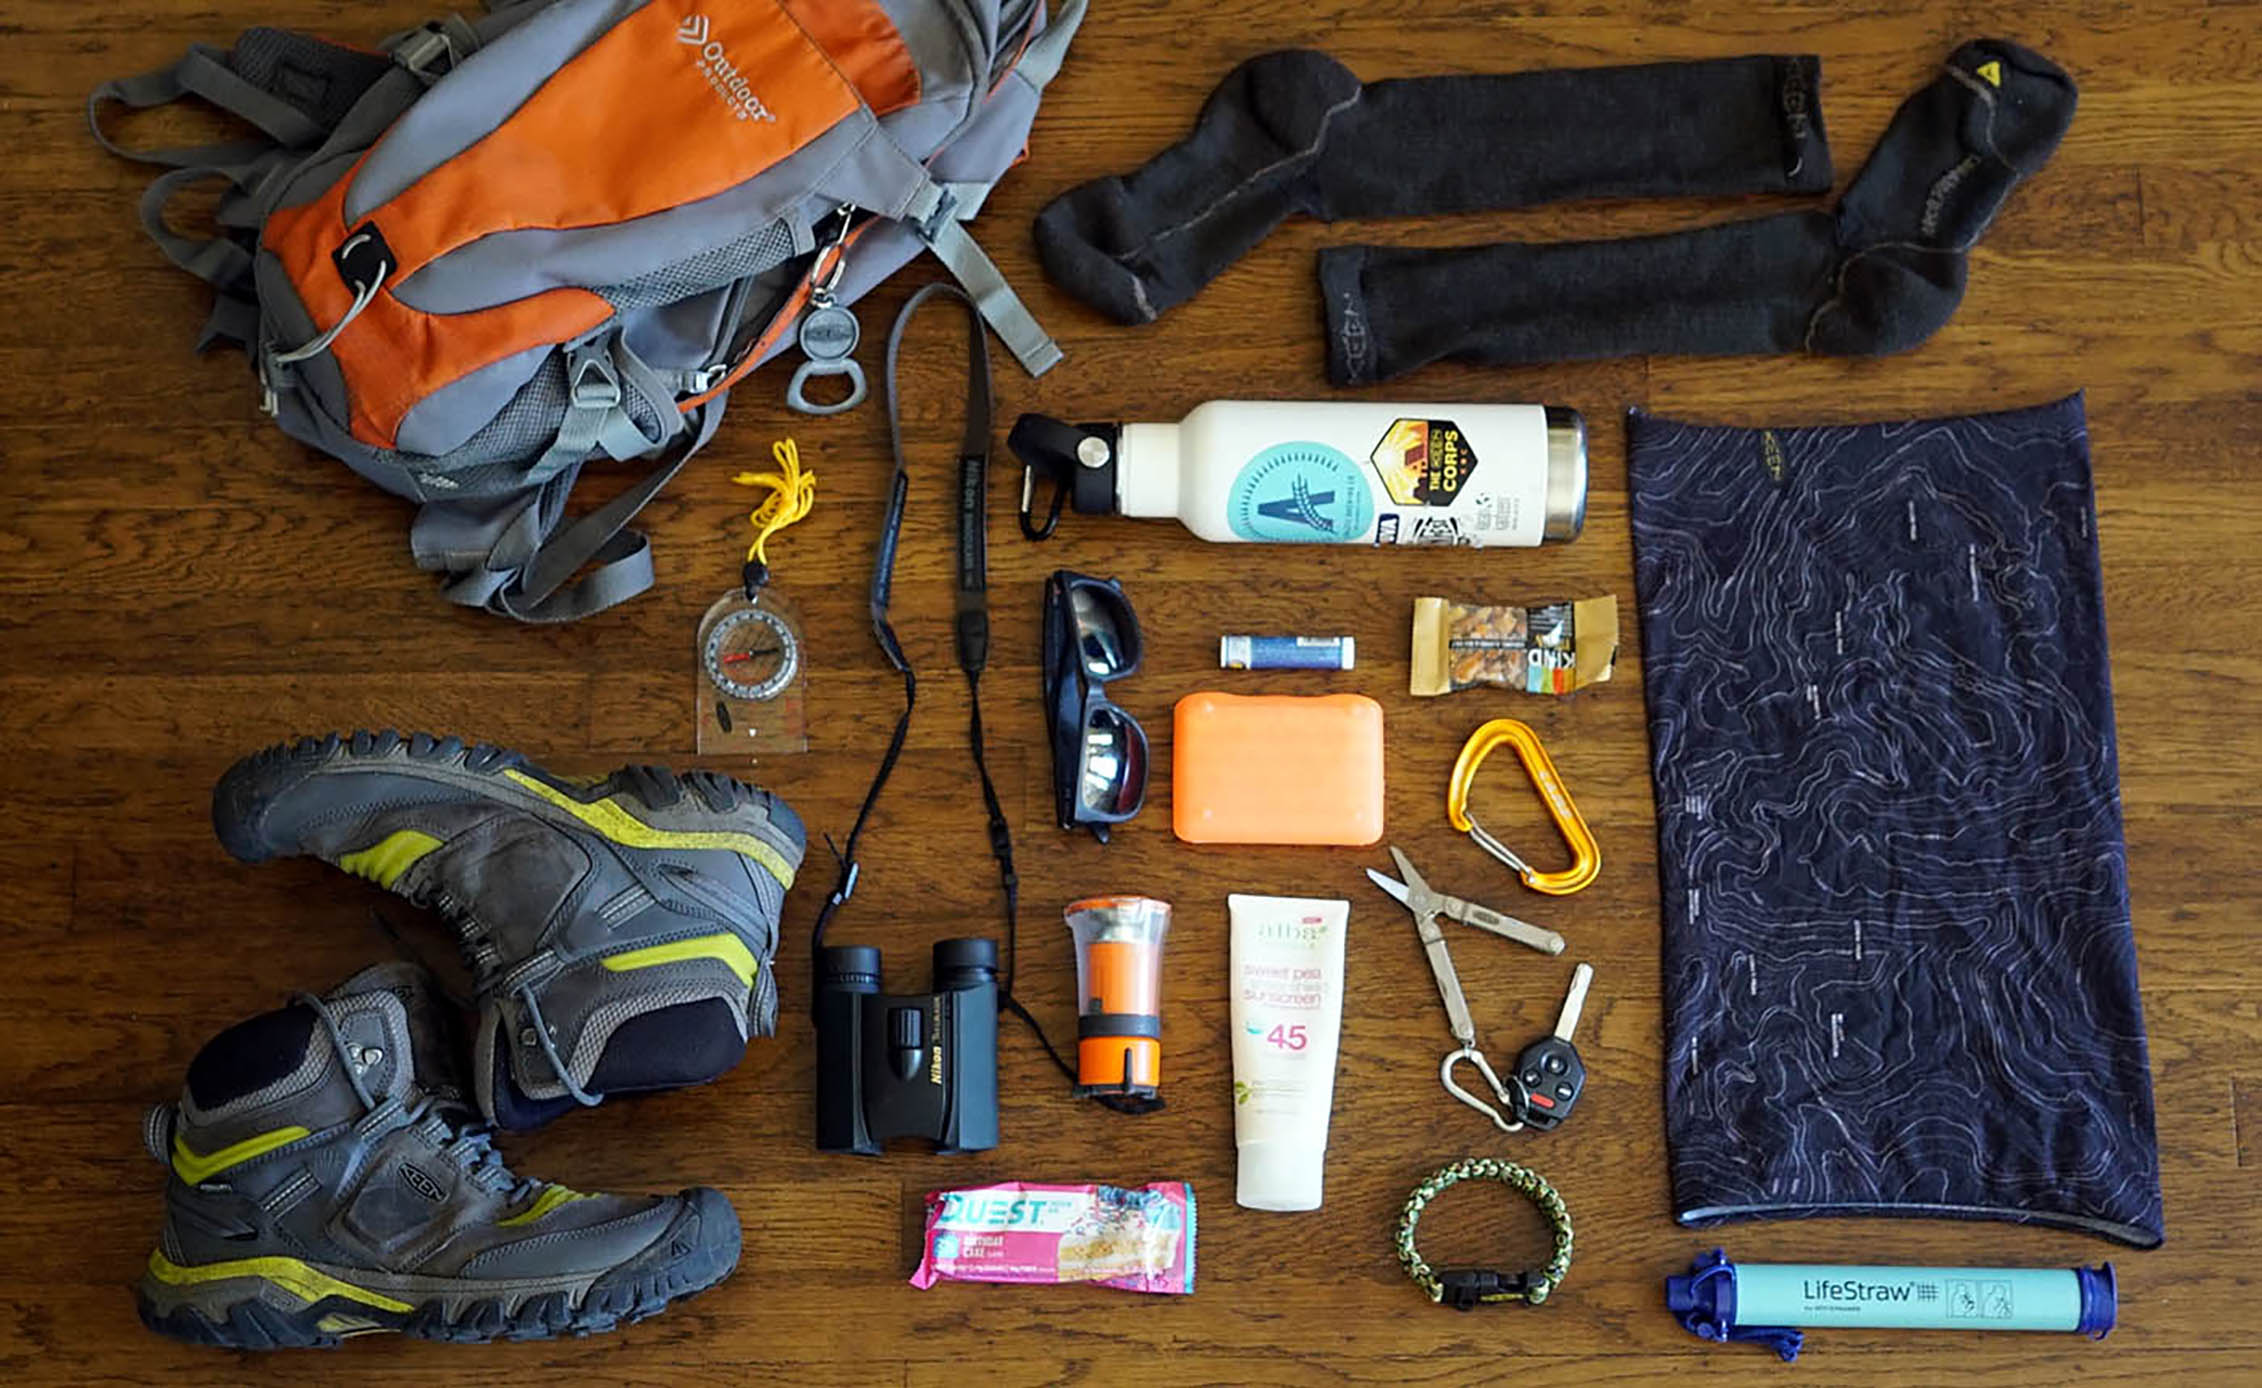 Multi-Use Hiking Gear to Pack